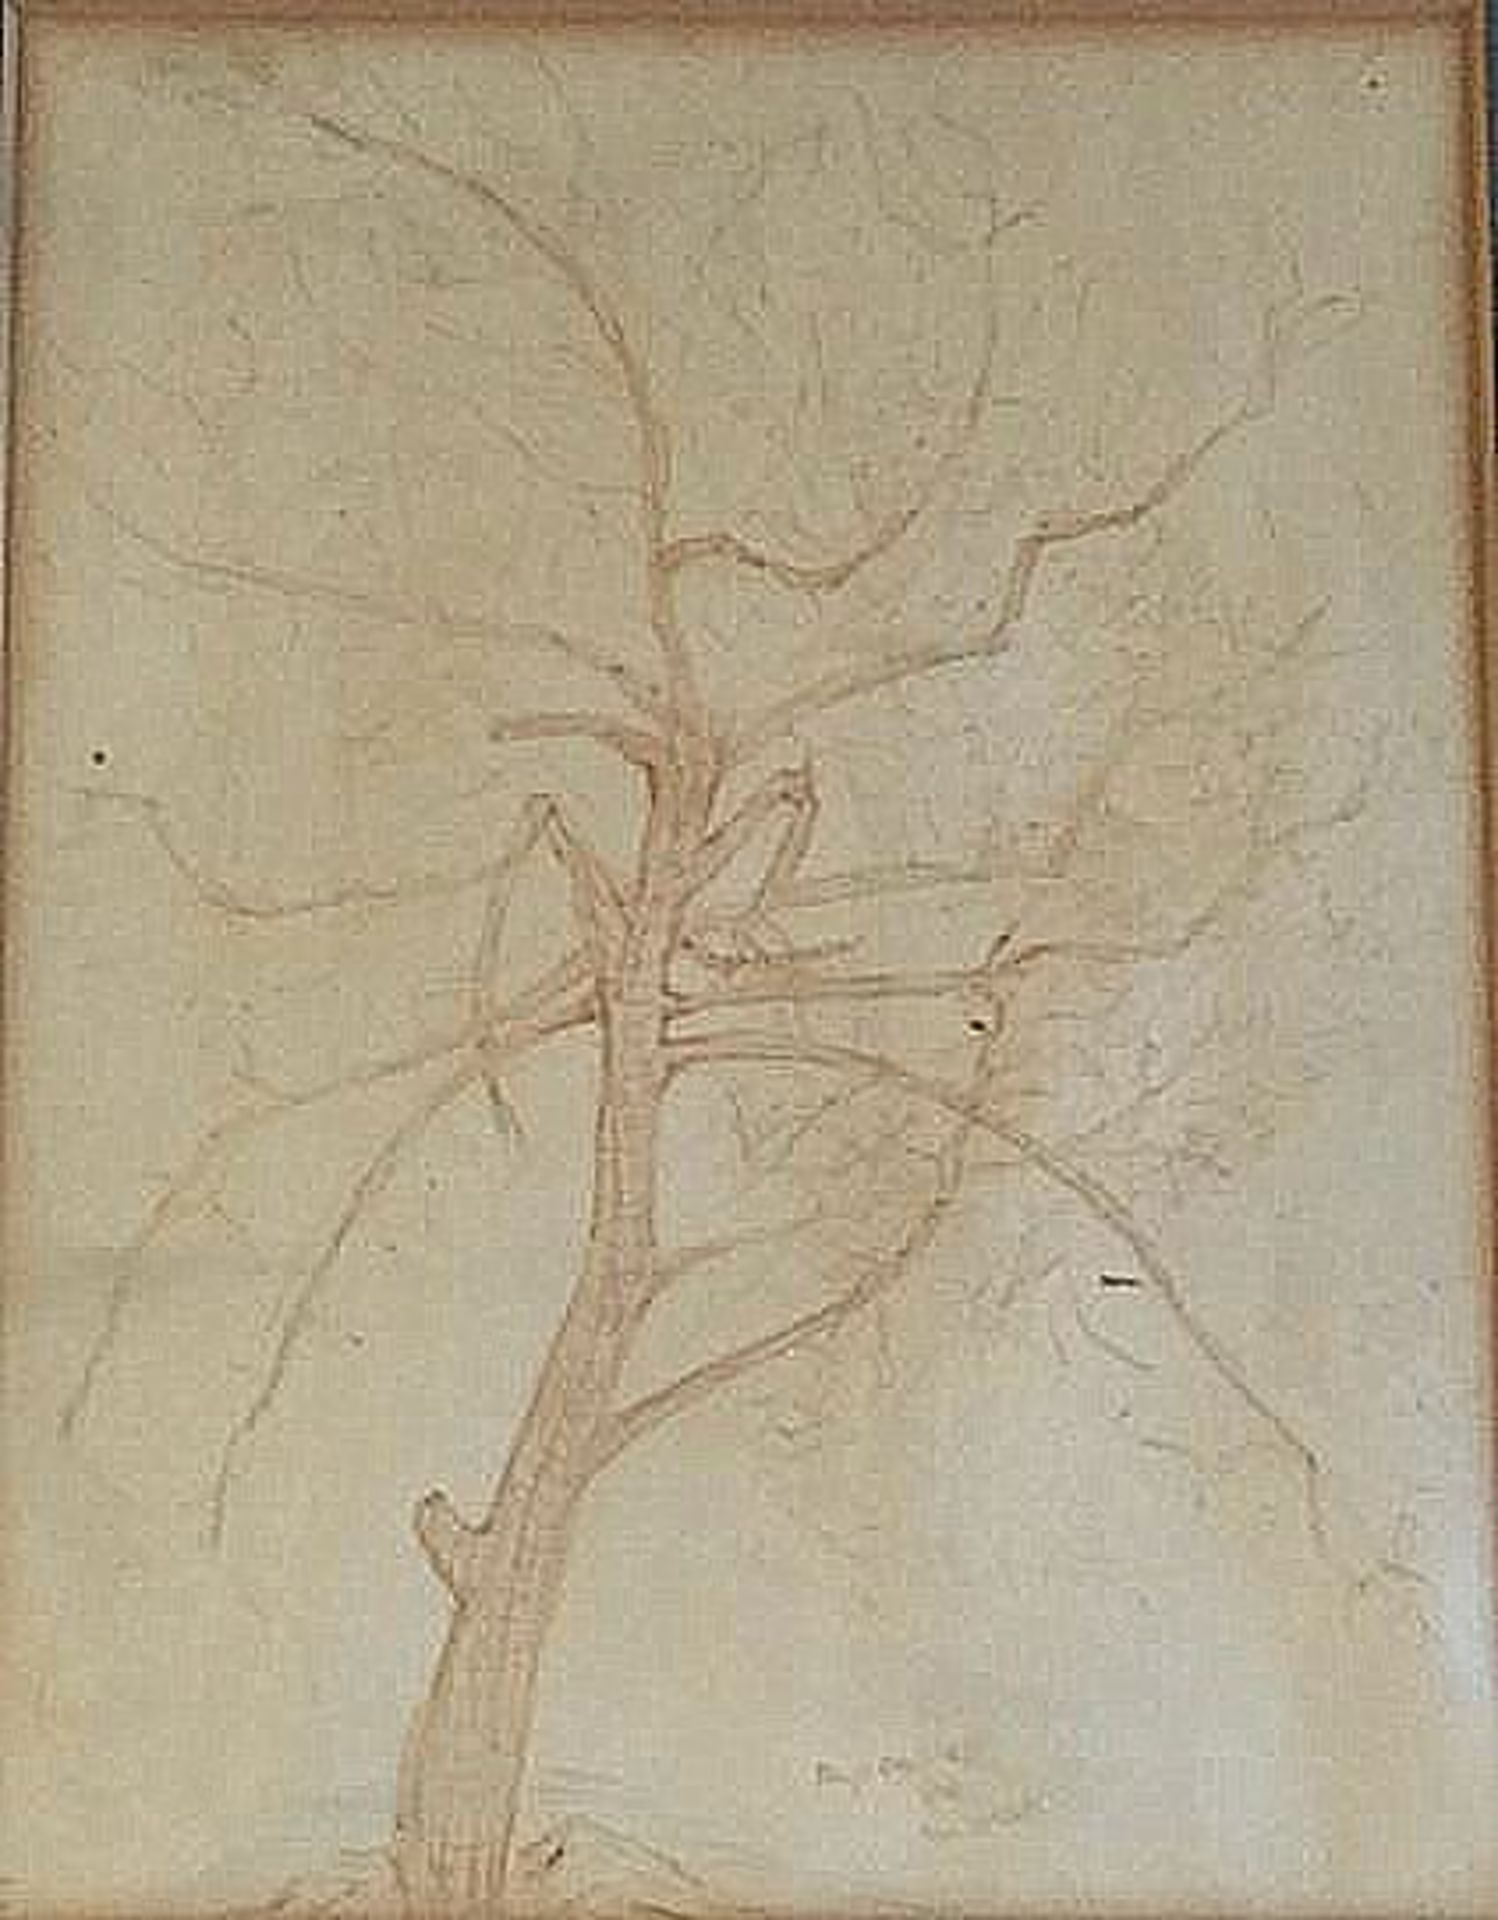 Red Tree sketch signed by Marek Szwarc, 41 x 50 cms 1954 - Image 3 of 6